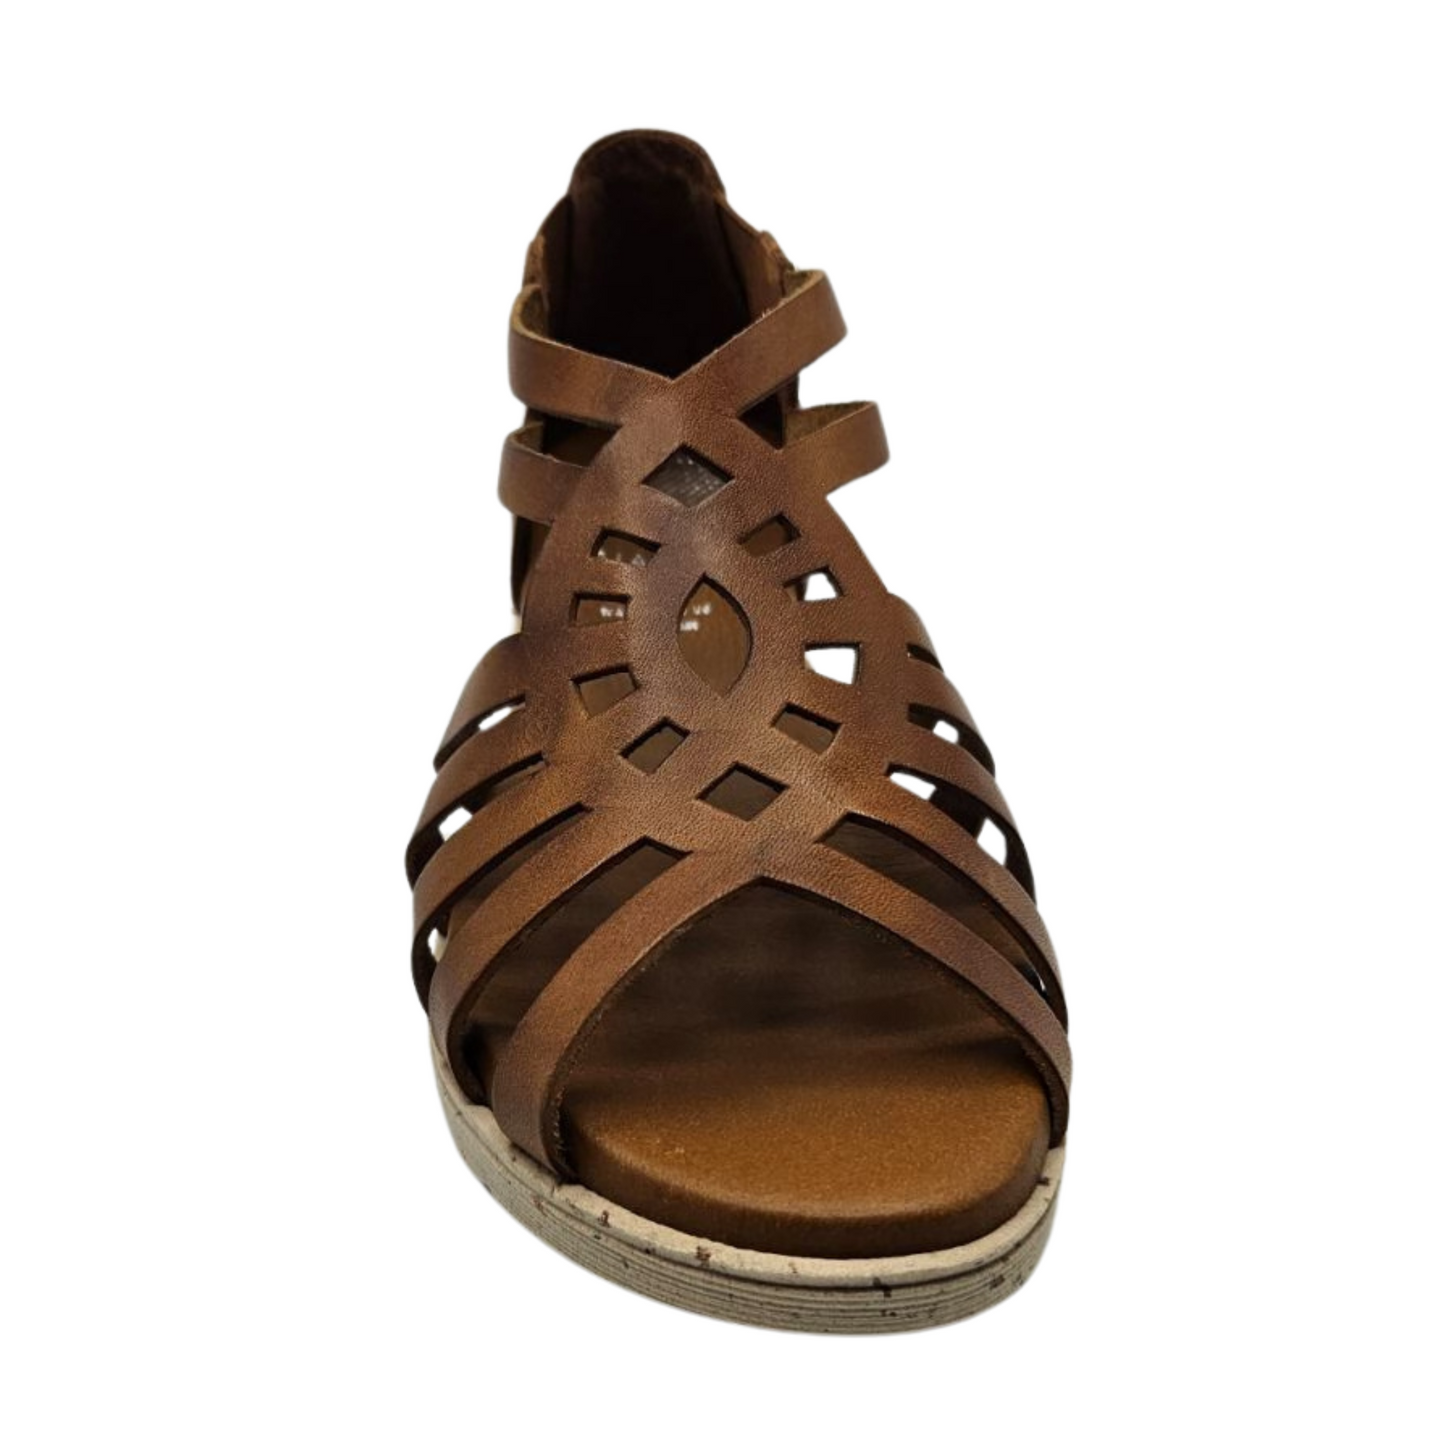 Front view of tan leather sandal with slight wedge heel and cutout design on upper.